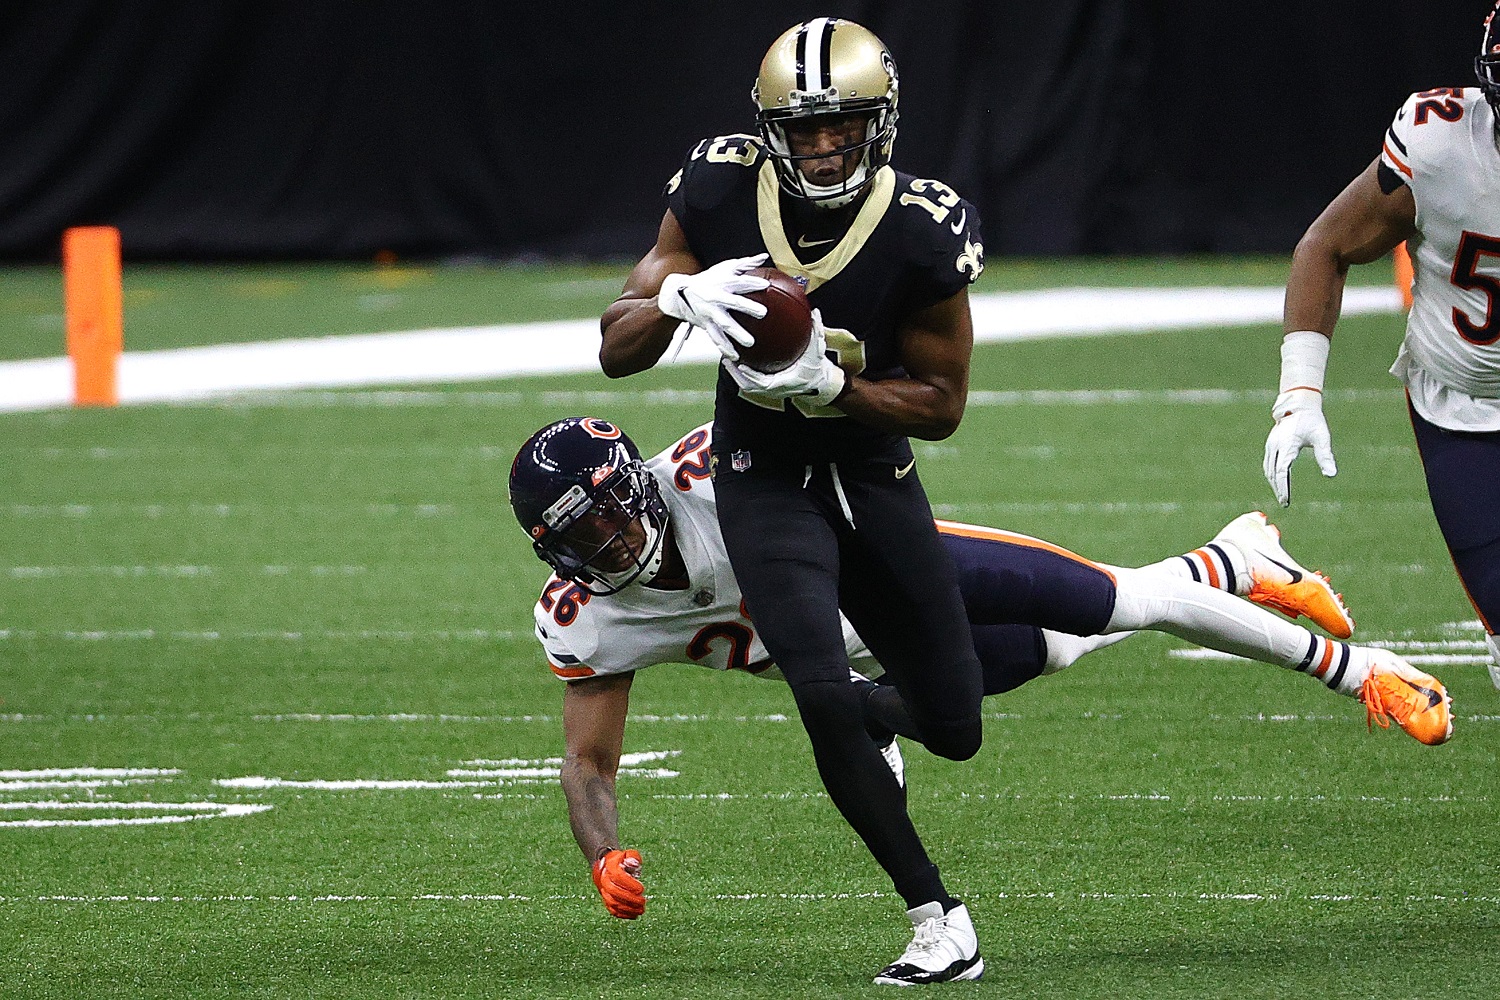 The New Orleans Saints gave Michael Thomas the go-ahead to pick rehabilitation over surgery on his injured ankle. However, the receiver kept the team in the dark for three months before the surprising revelation that he ended up needing the surgery anyway. | Chris Graythen/Getty Images